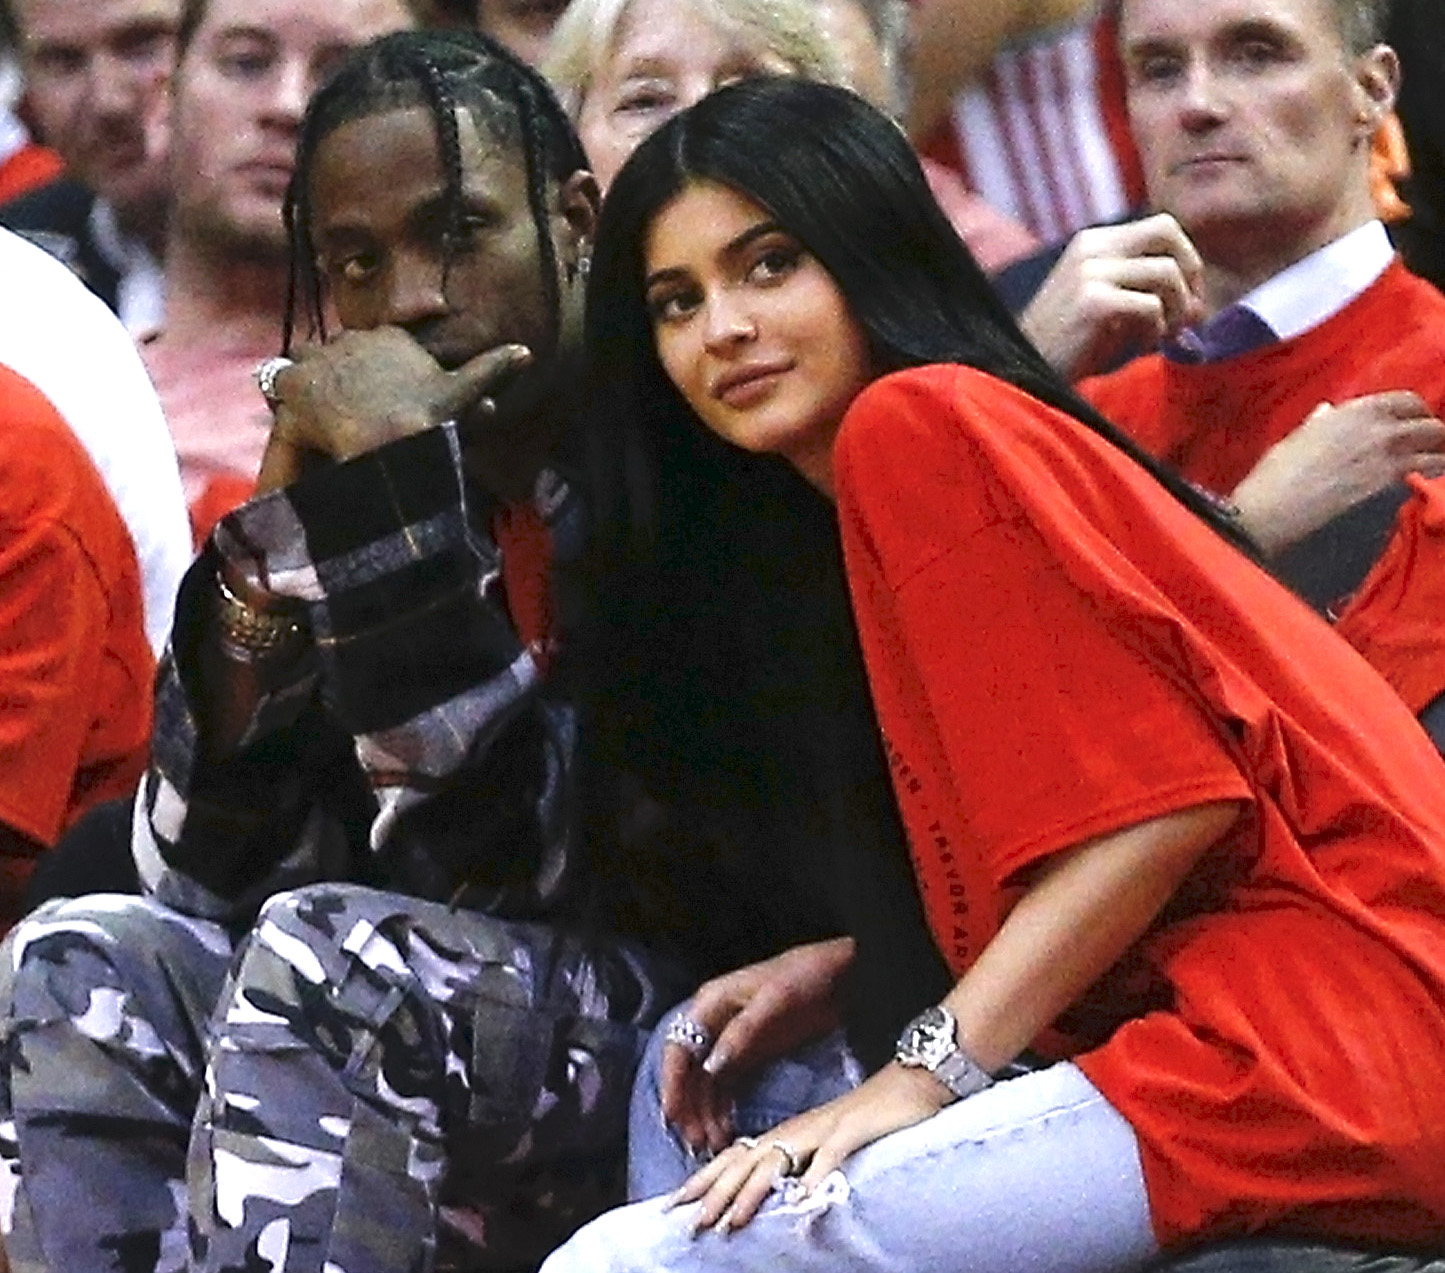 Kylie Jenner Is Sure Travis Scott Is the Father | Life & Style